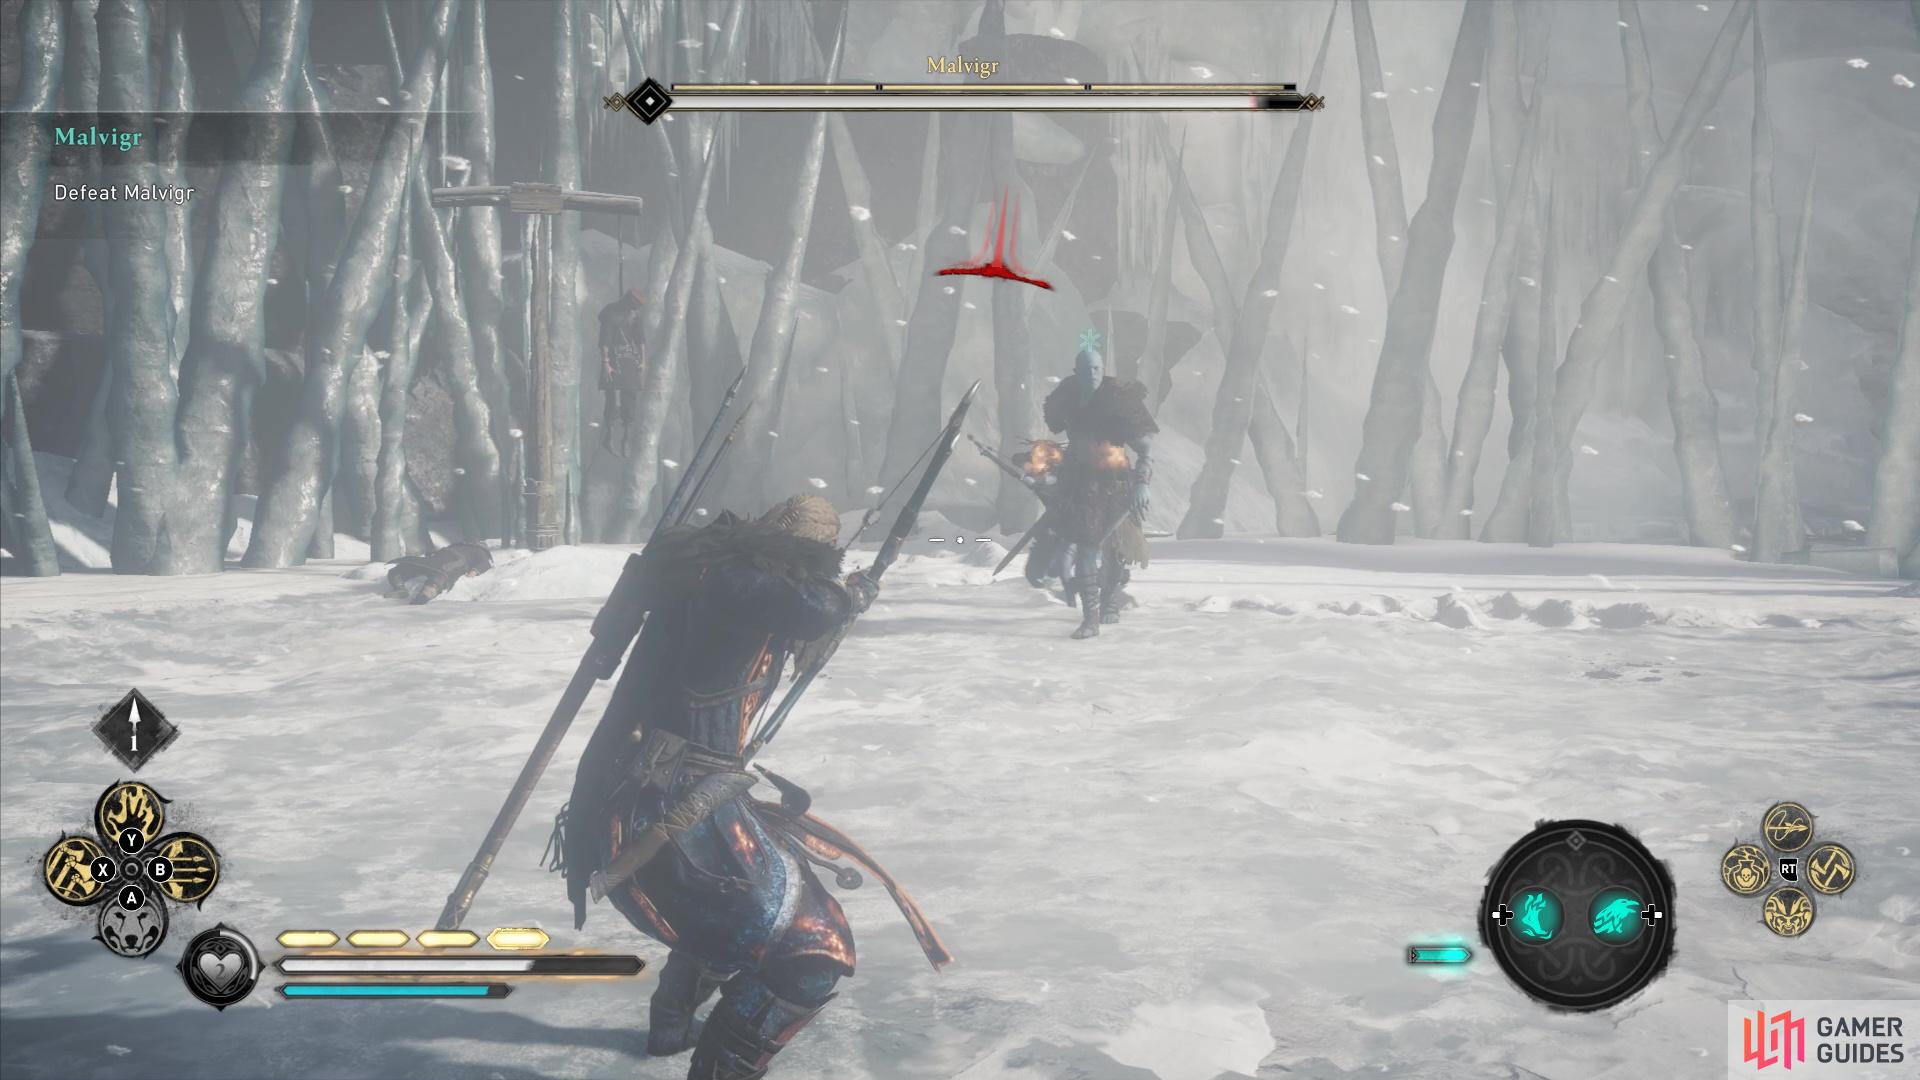 You'll first need to clear out the elite enemies before you can fight Malvigr